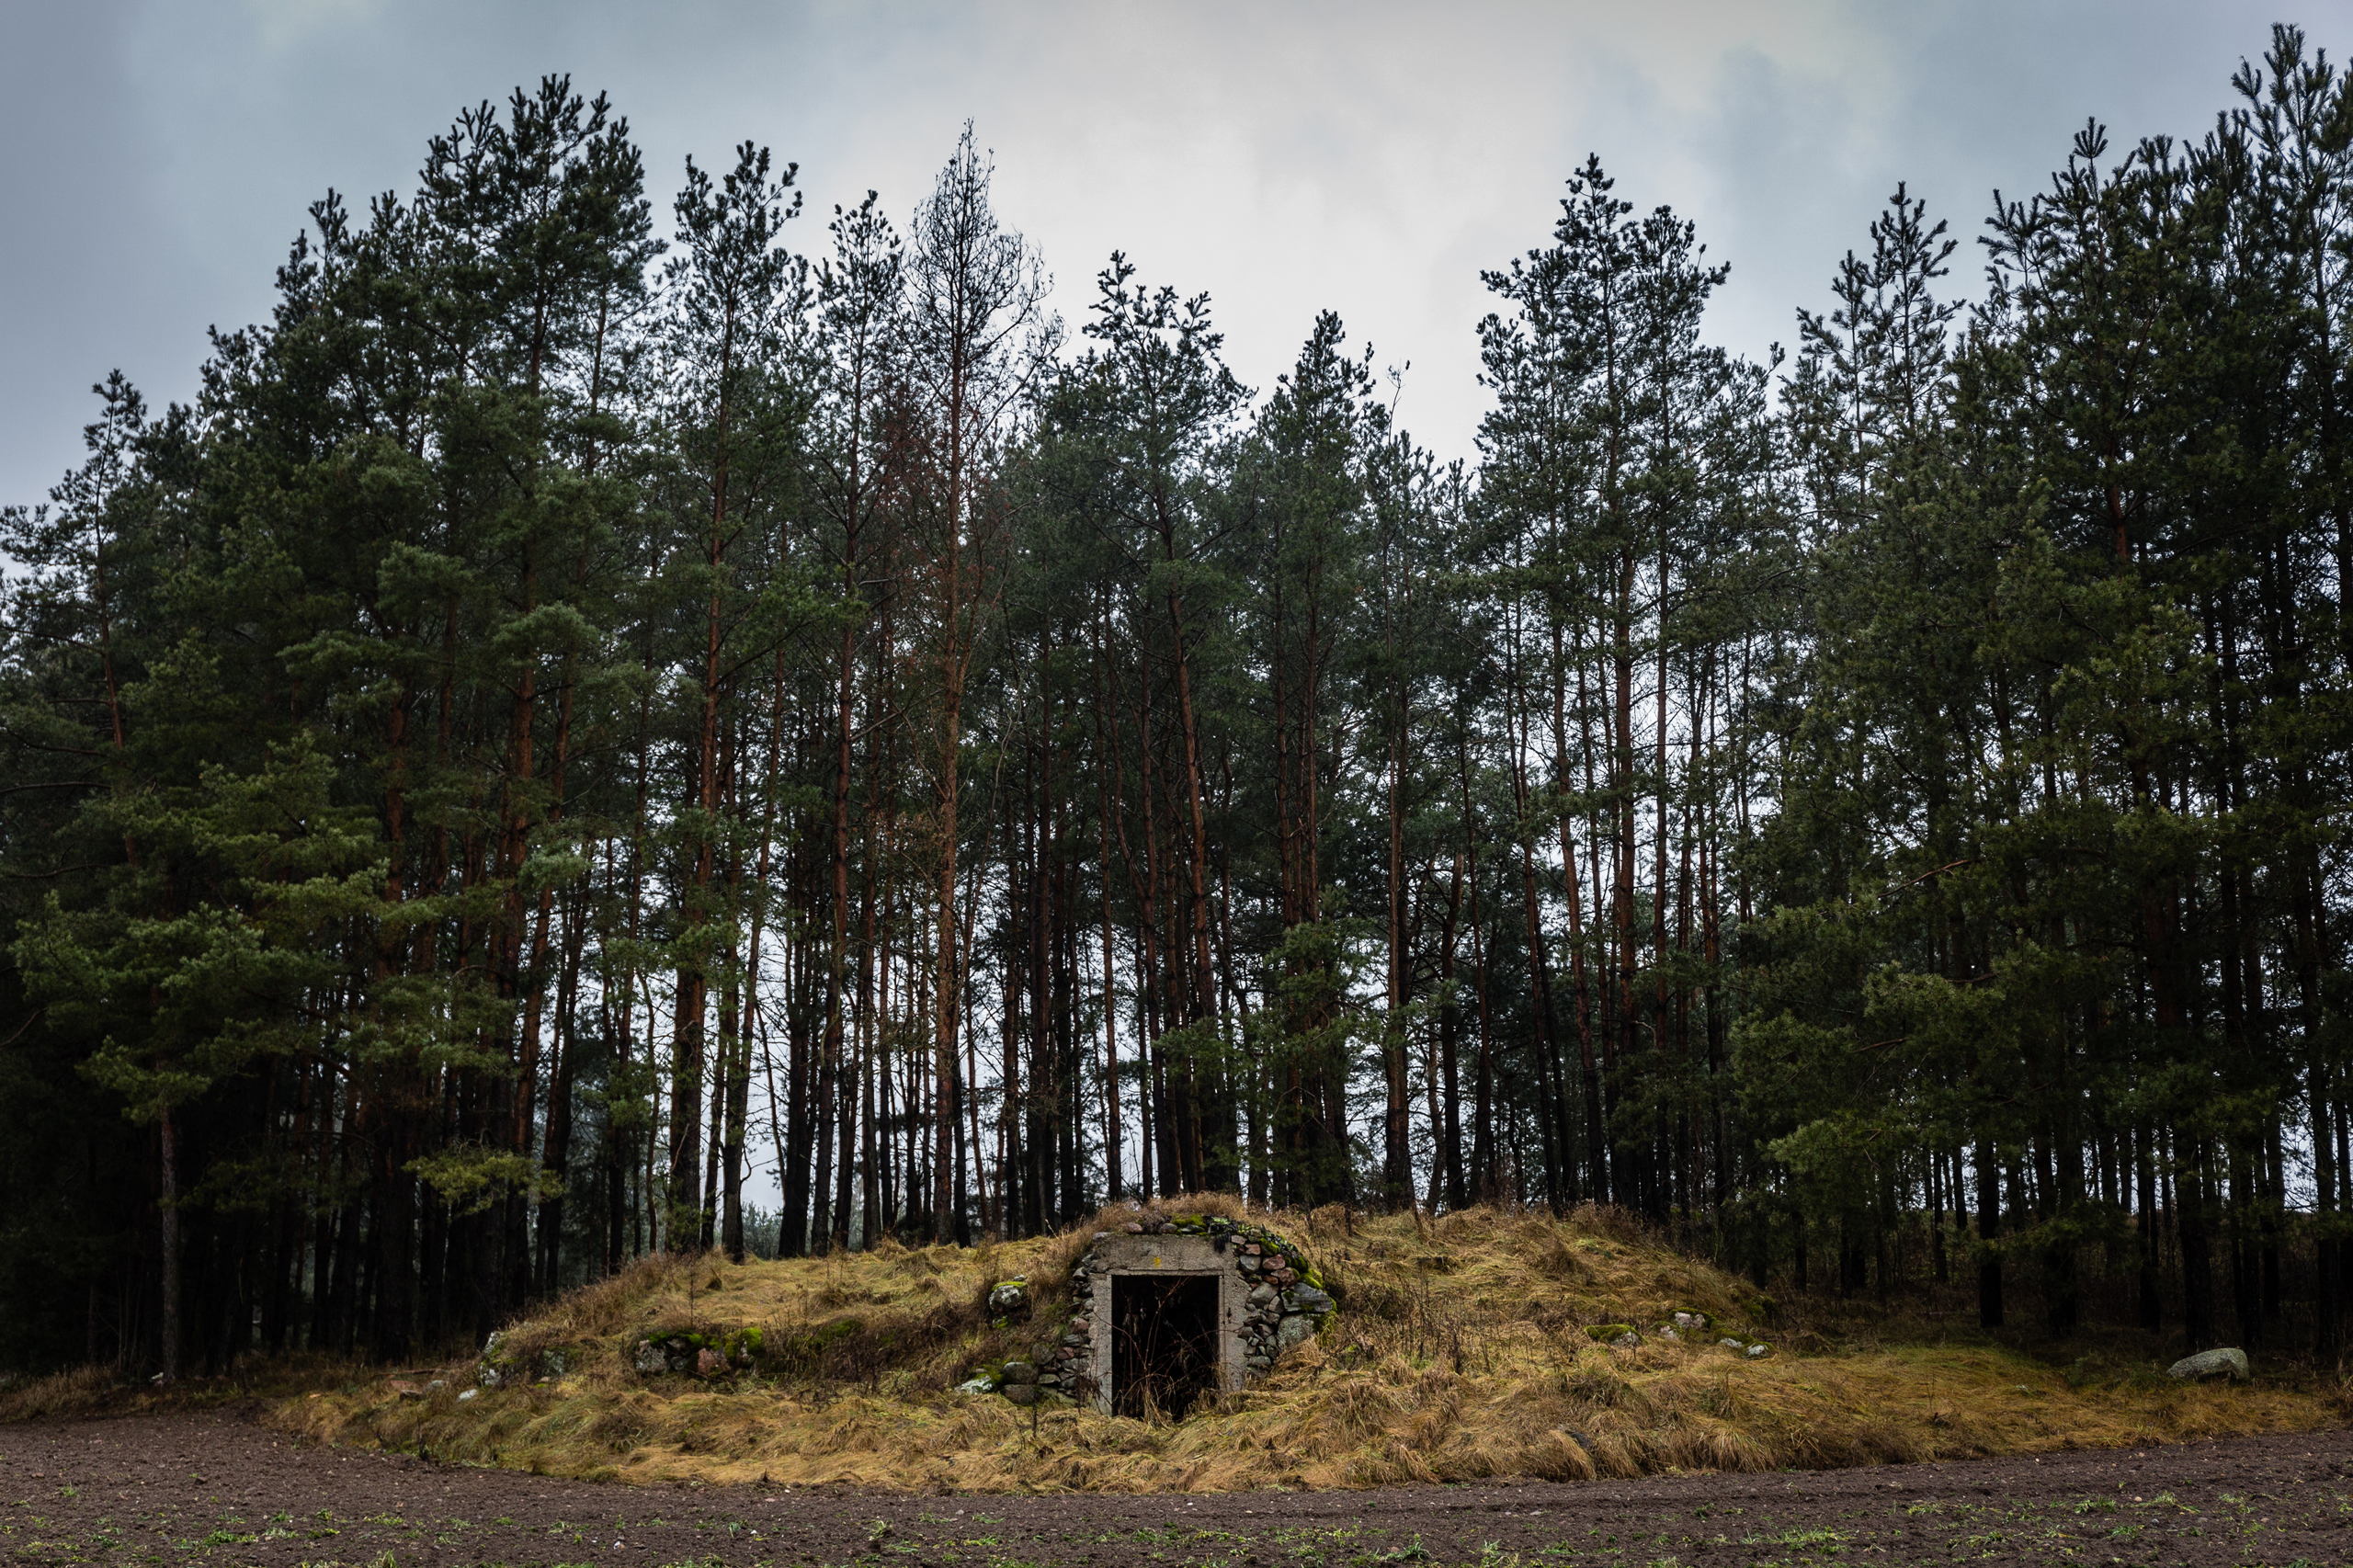 A World War II bunker in Gruszki, Poland, at the border with Belarus. Situated next to Russia, Ukraine and the Baltic States of Lithuania and Latvia, historically this has been a region of shifting borders and territorial control.